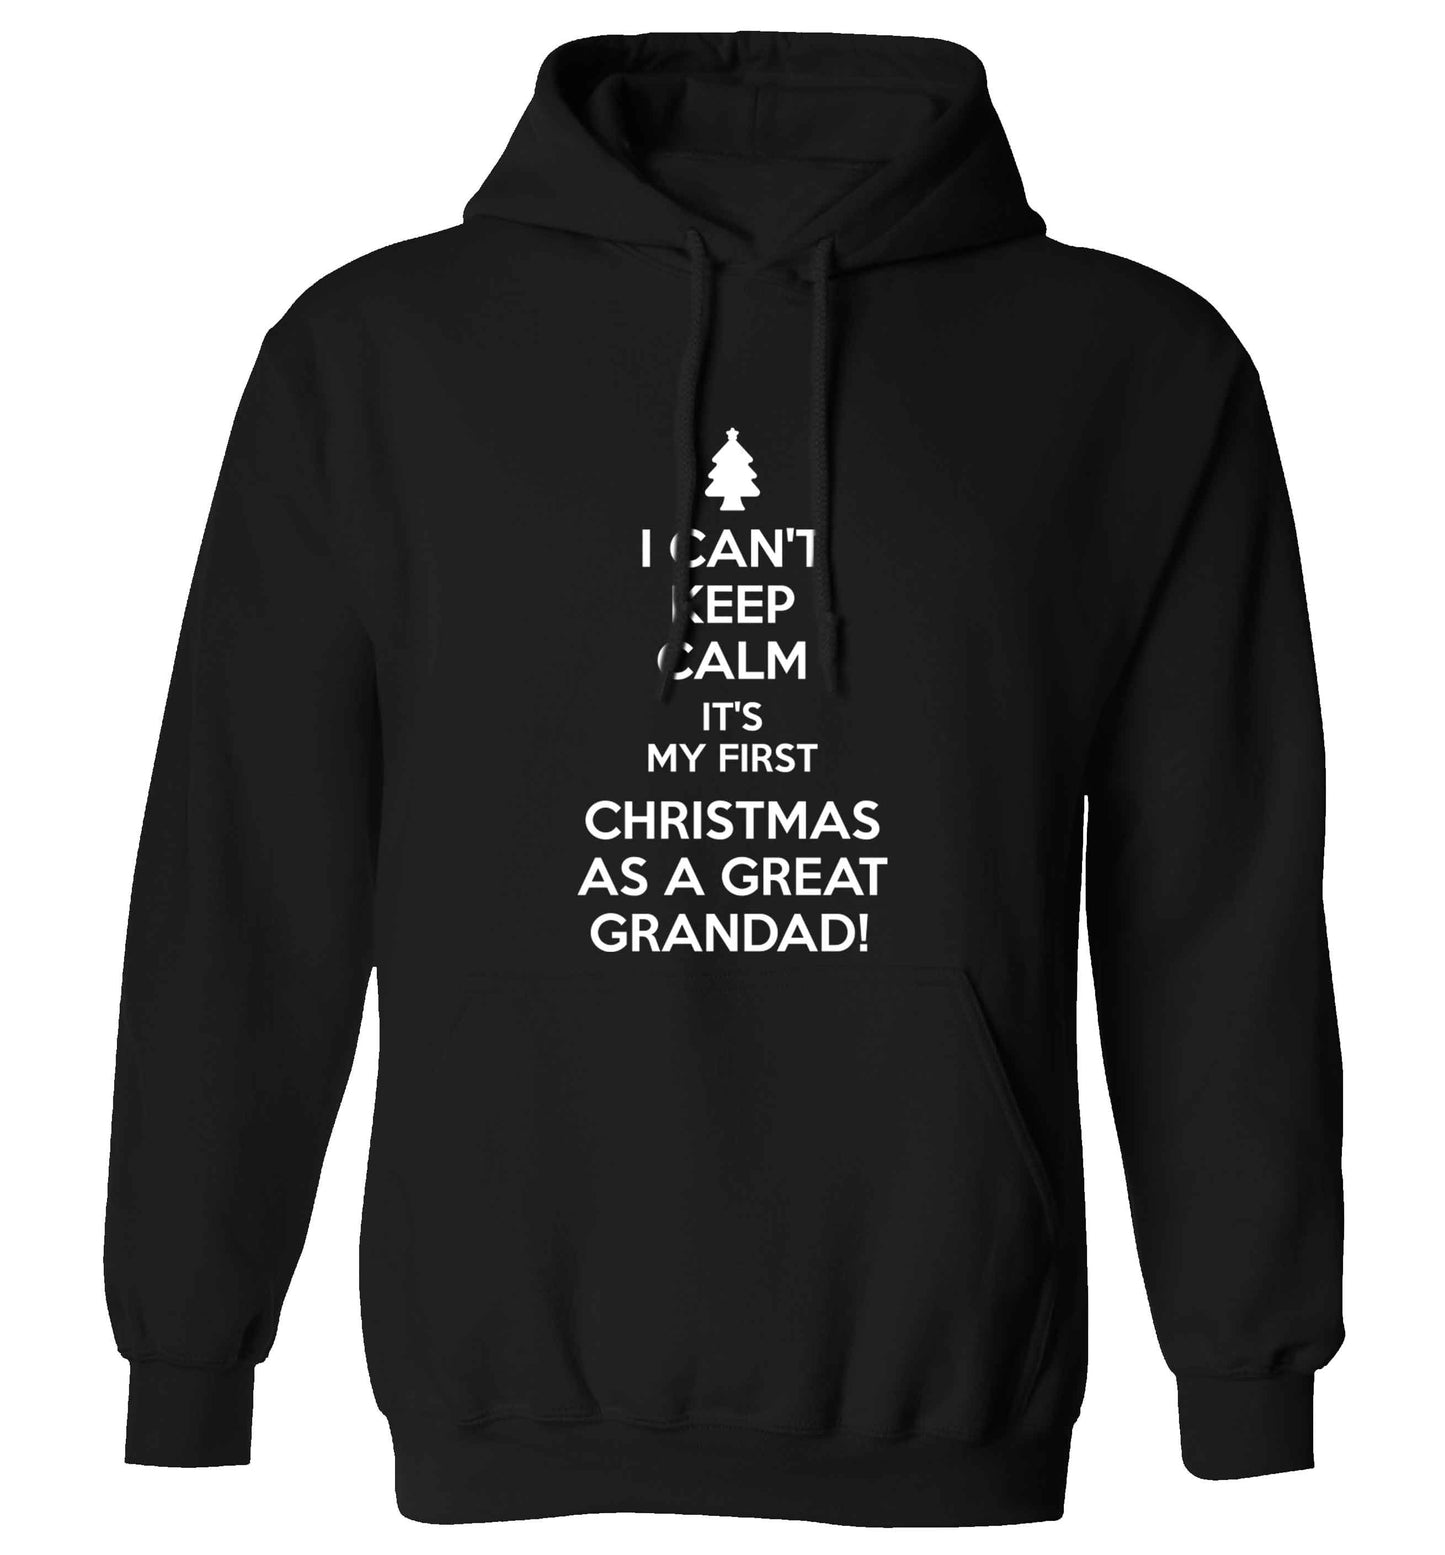 I can't keep calm it's my first Christmas as a great grandad! adults unisex black hoodie 2XL